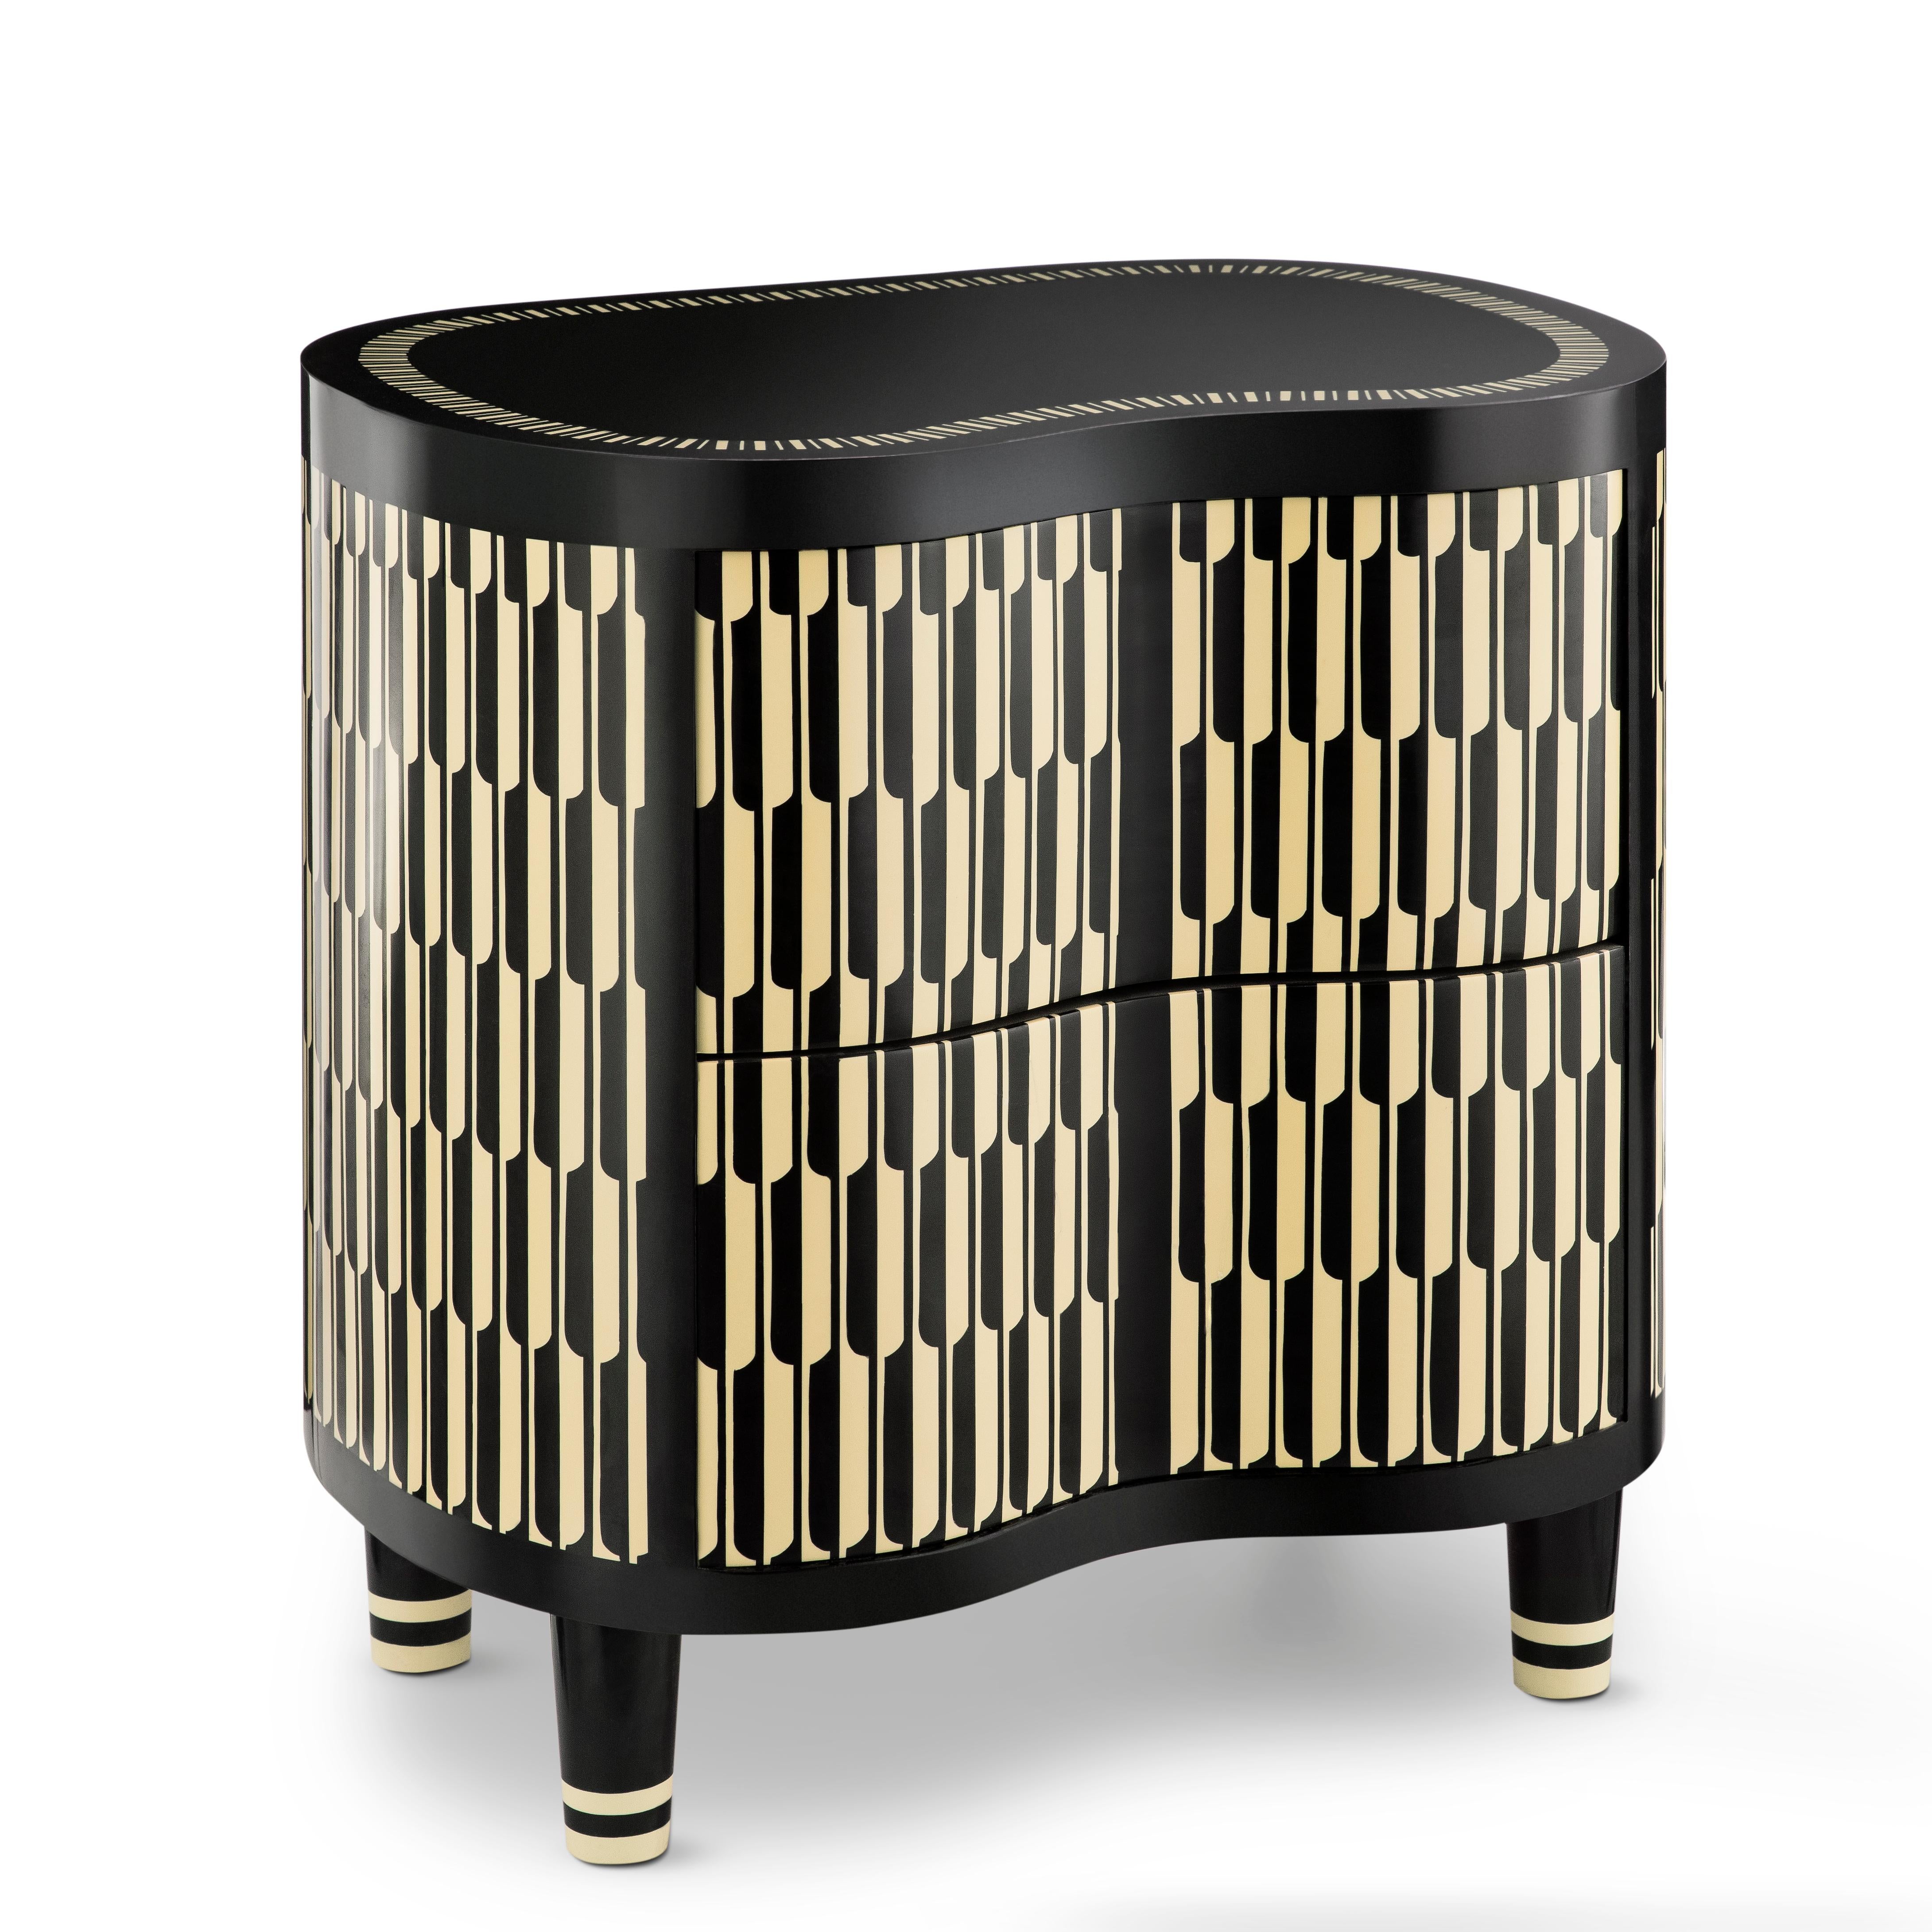 The Kid Bed Side Table by Matteo Cibic is a delightful night or bedside table.

India's handicrafts are as multifarious as its cultures, and as rich as its history. The art of bone and horn inlay is omnipresent here. Artisans from the Northern